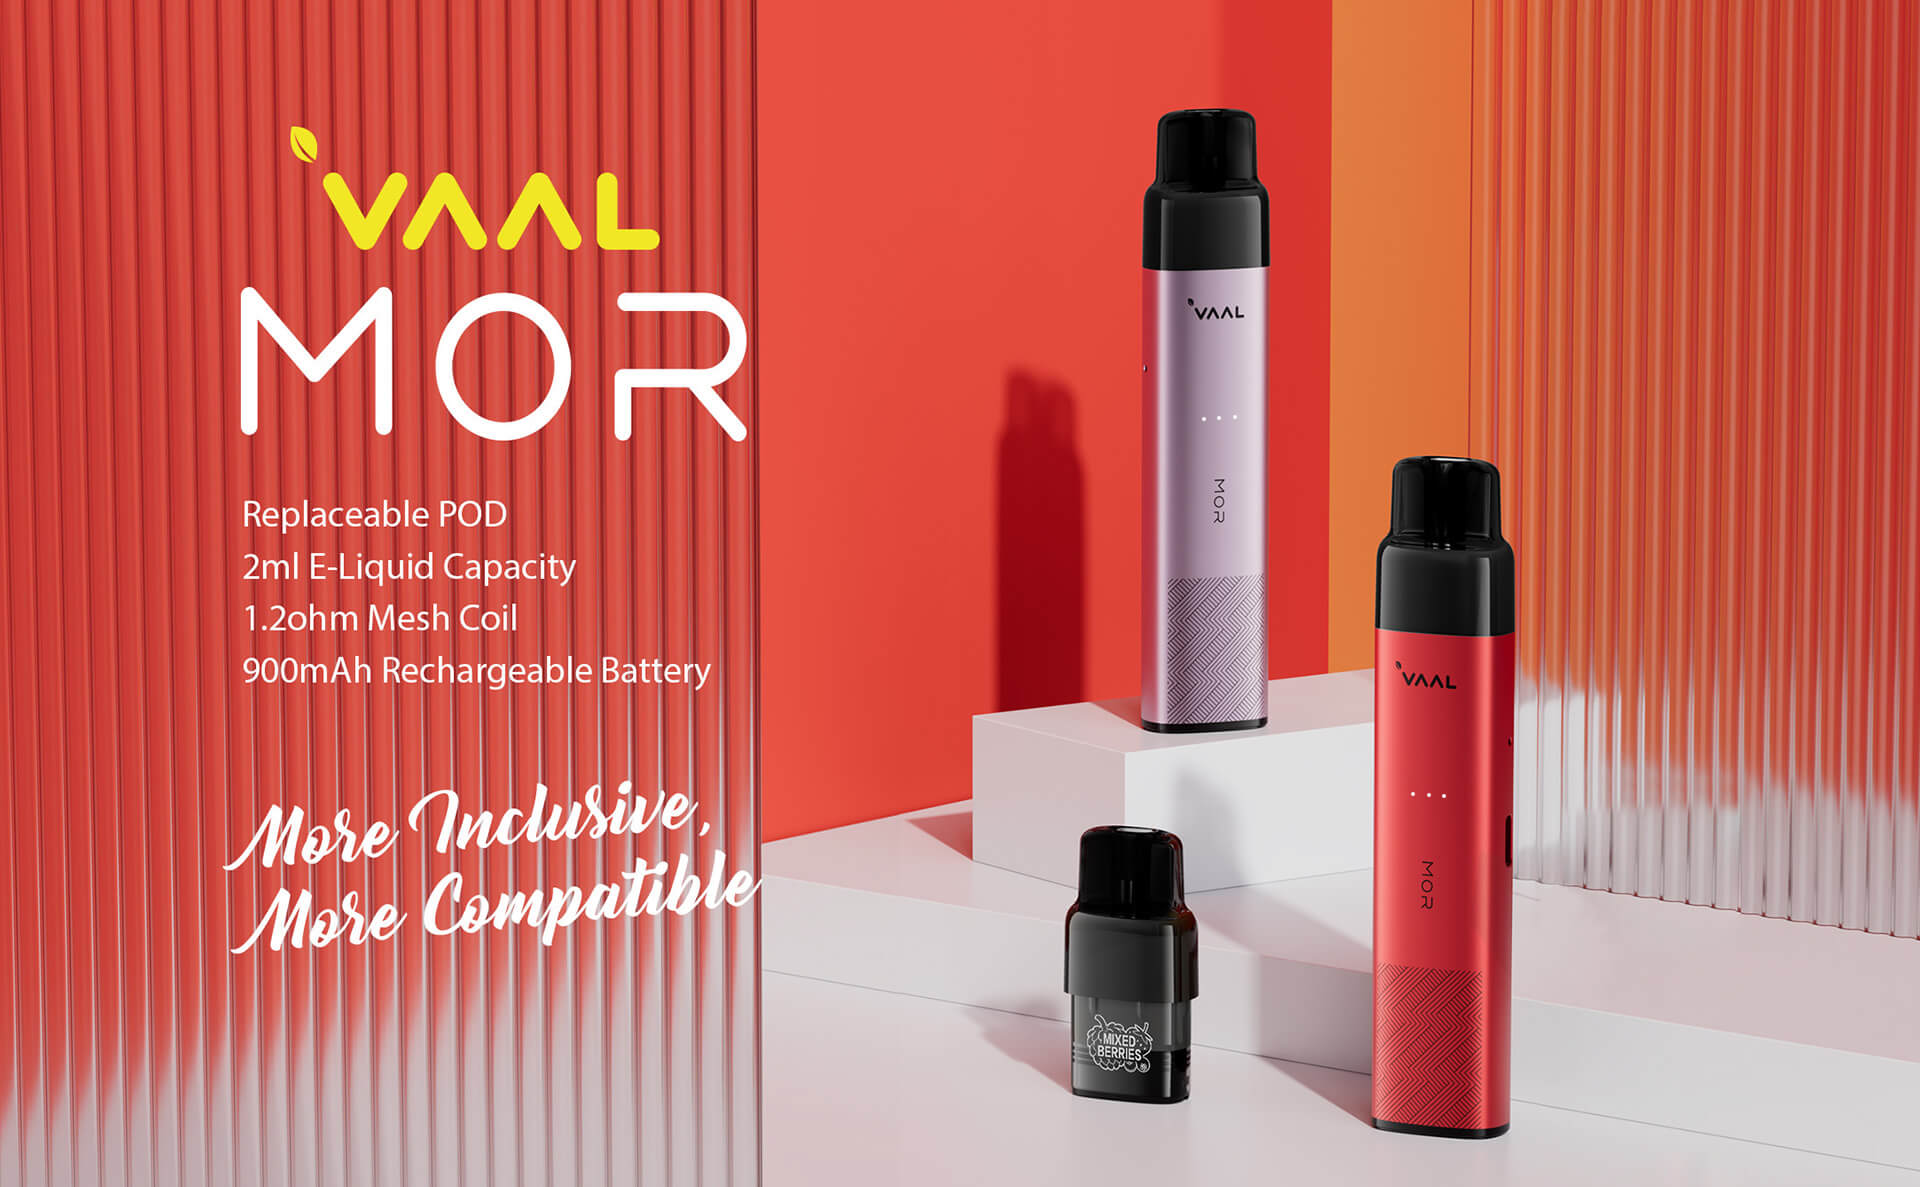 VAAL MOR features a replaceable POD system with 2ml e-liquid capacity, 1.2-ohm mesh coil, 900mAh rechargeable battery, compatibility with all Joyetech EVIO Grip pods, and a variety of pre-filled e-liquid flavors for a versatile vaping experience.